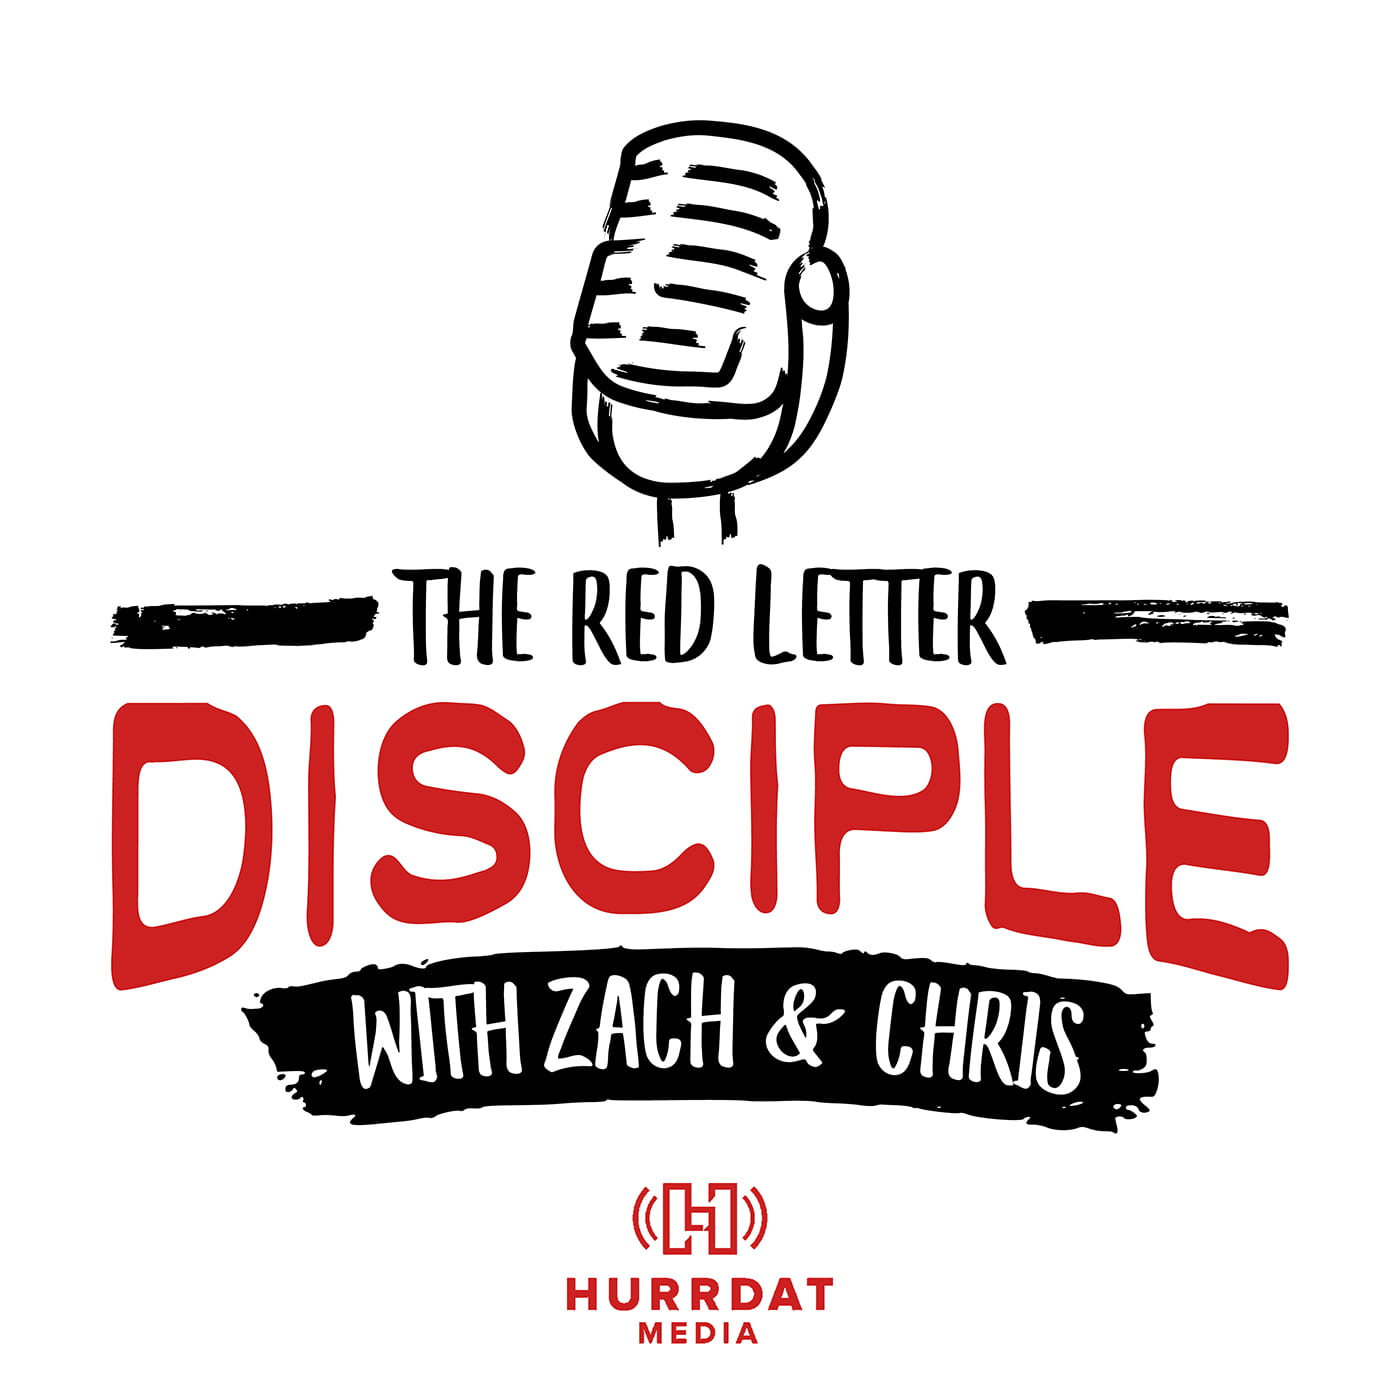 The Red Letter Disciple